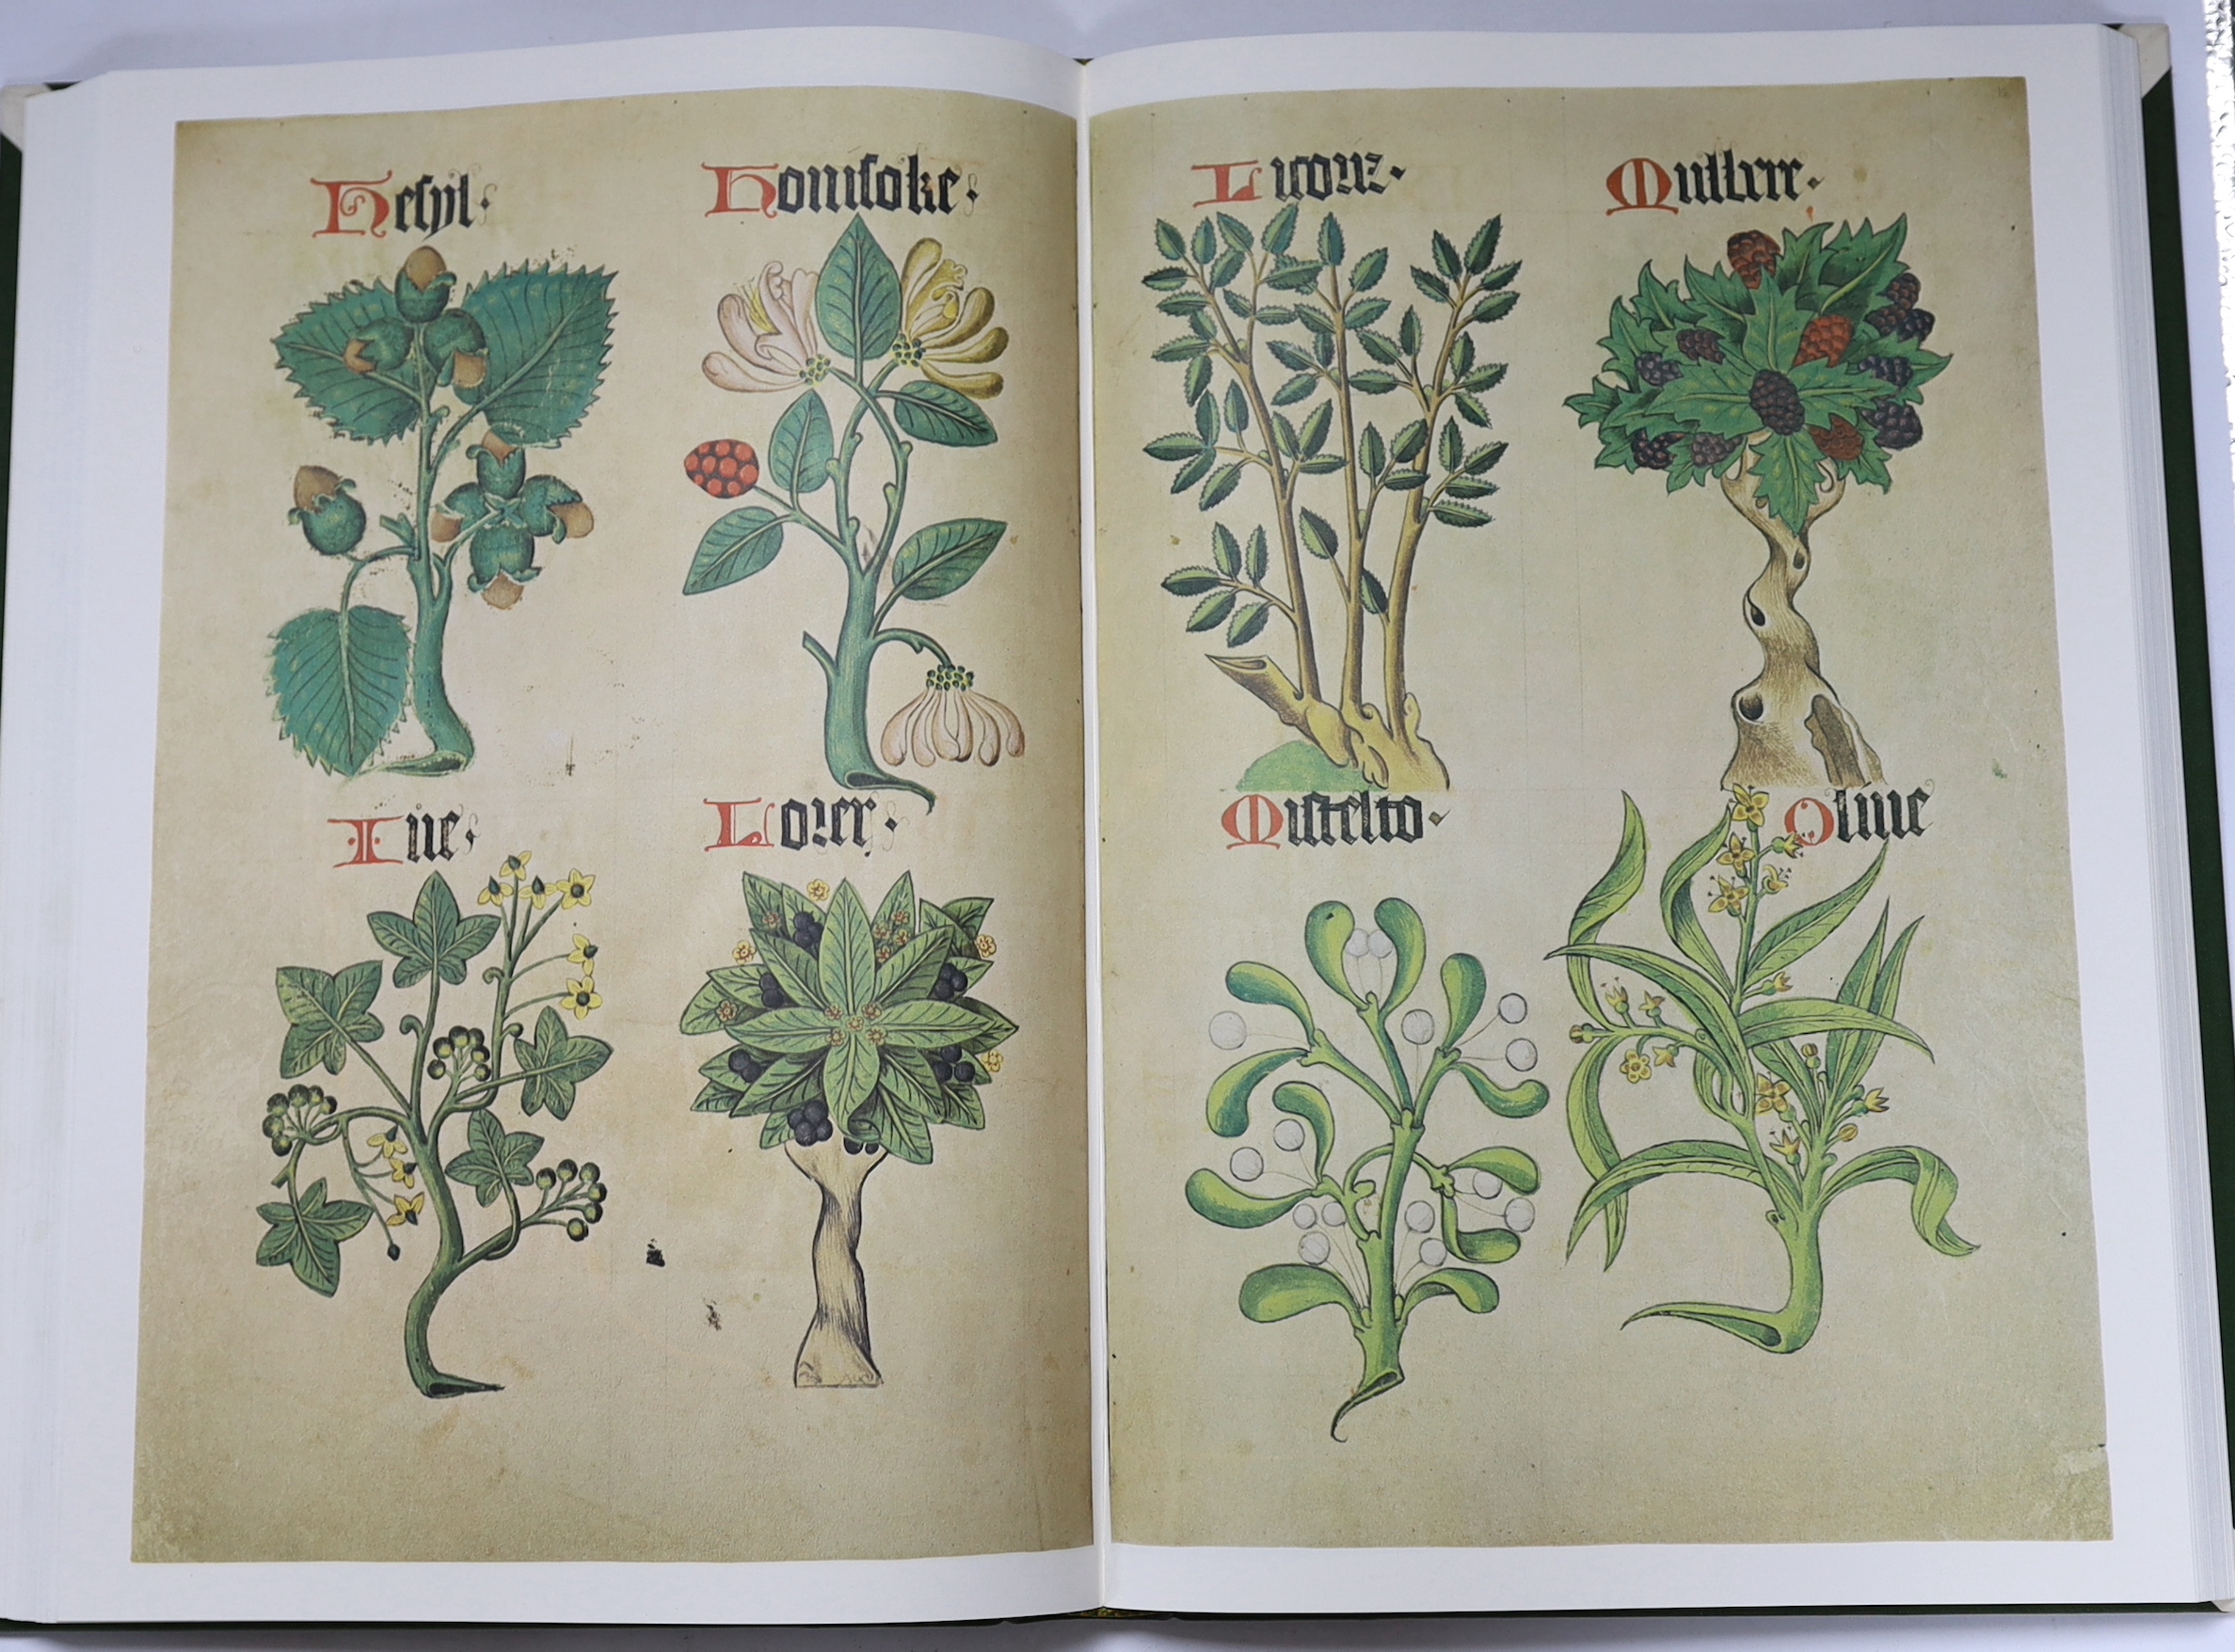 Barker, Nicolas (editor). Two East Anglian Picture Books: a facsimile of the Helmingham Herbal and Bestiary and Bodleian MS. Ashmole 1504. 135pp. of coloured facsimiles, 16 photo plates, 2 diagrammatic plates, a map and